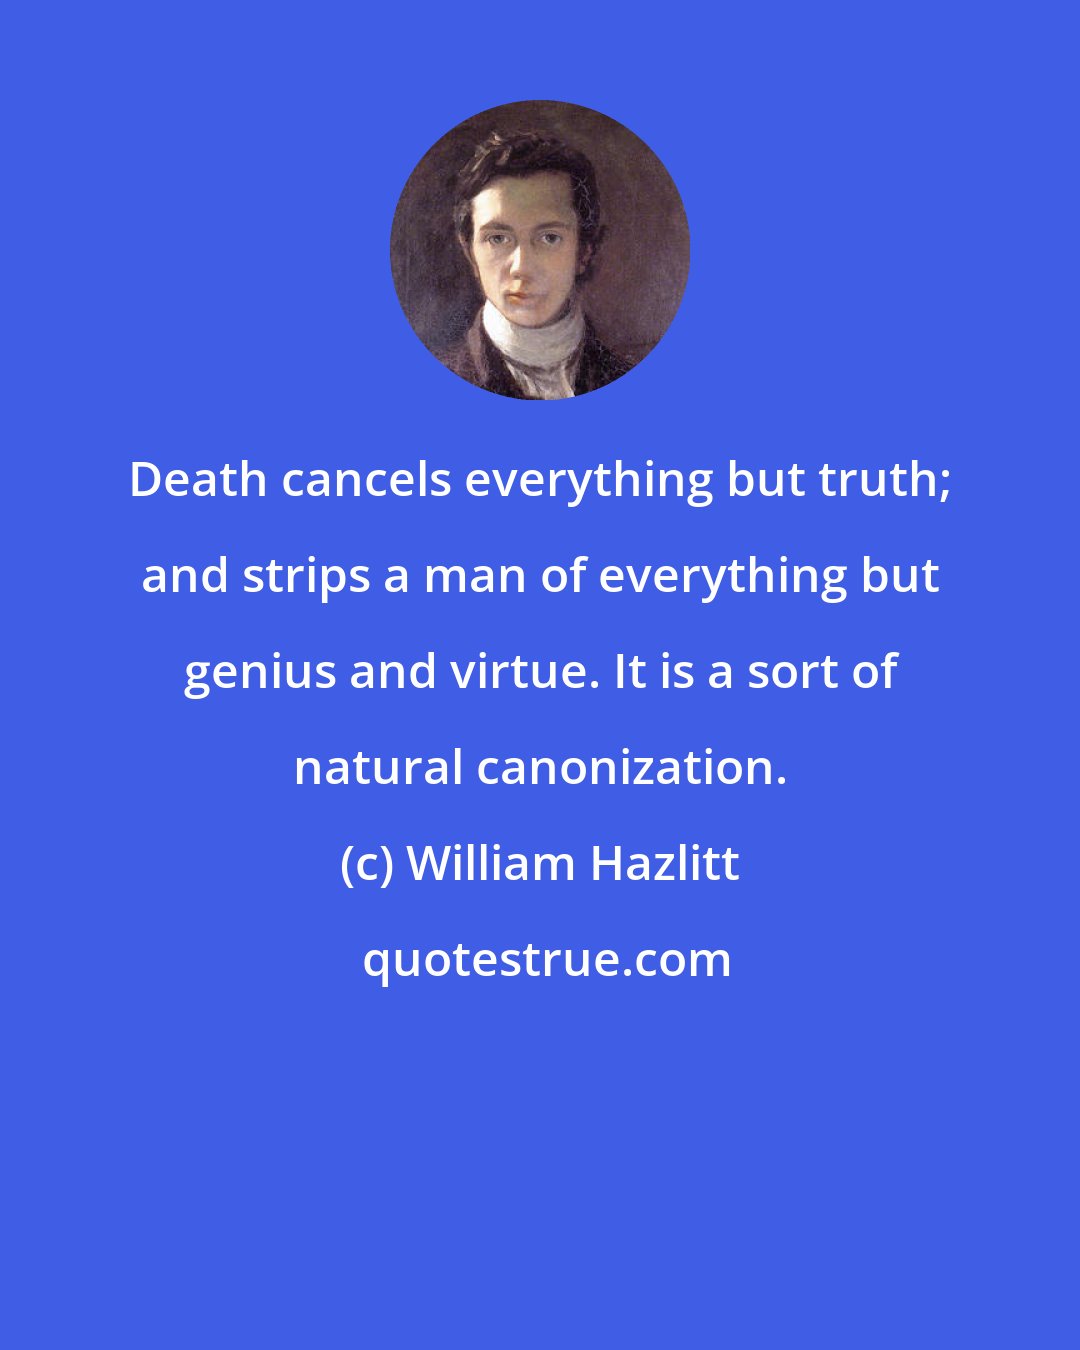 William Hazlitt: Death cancels everything but truth; and strips a man of everything but genius and virtue. It is a sort of natural canonization.